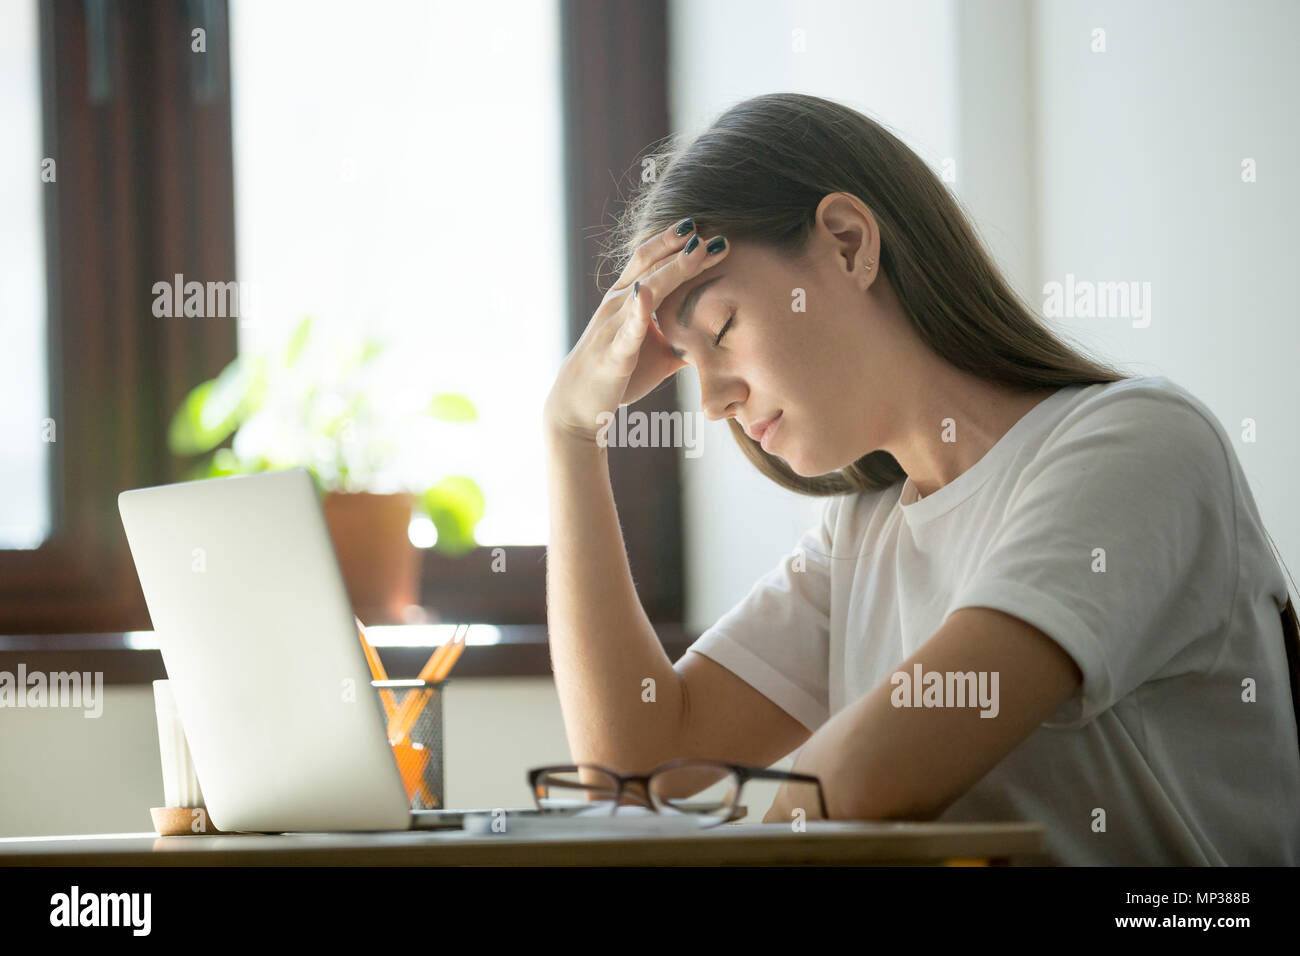 Tired female lying on table suffering from headache Stock Photo